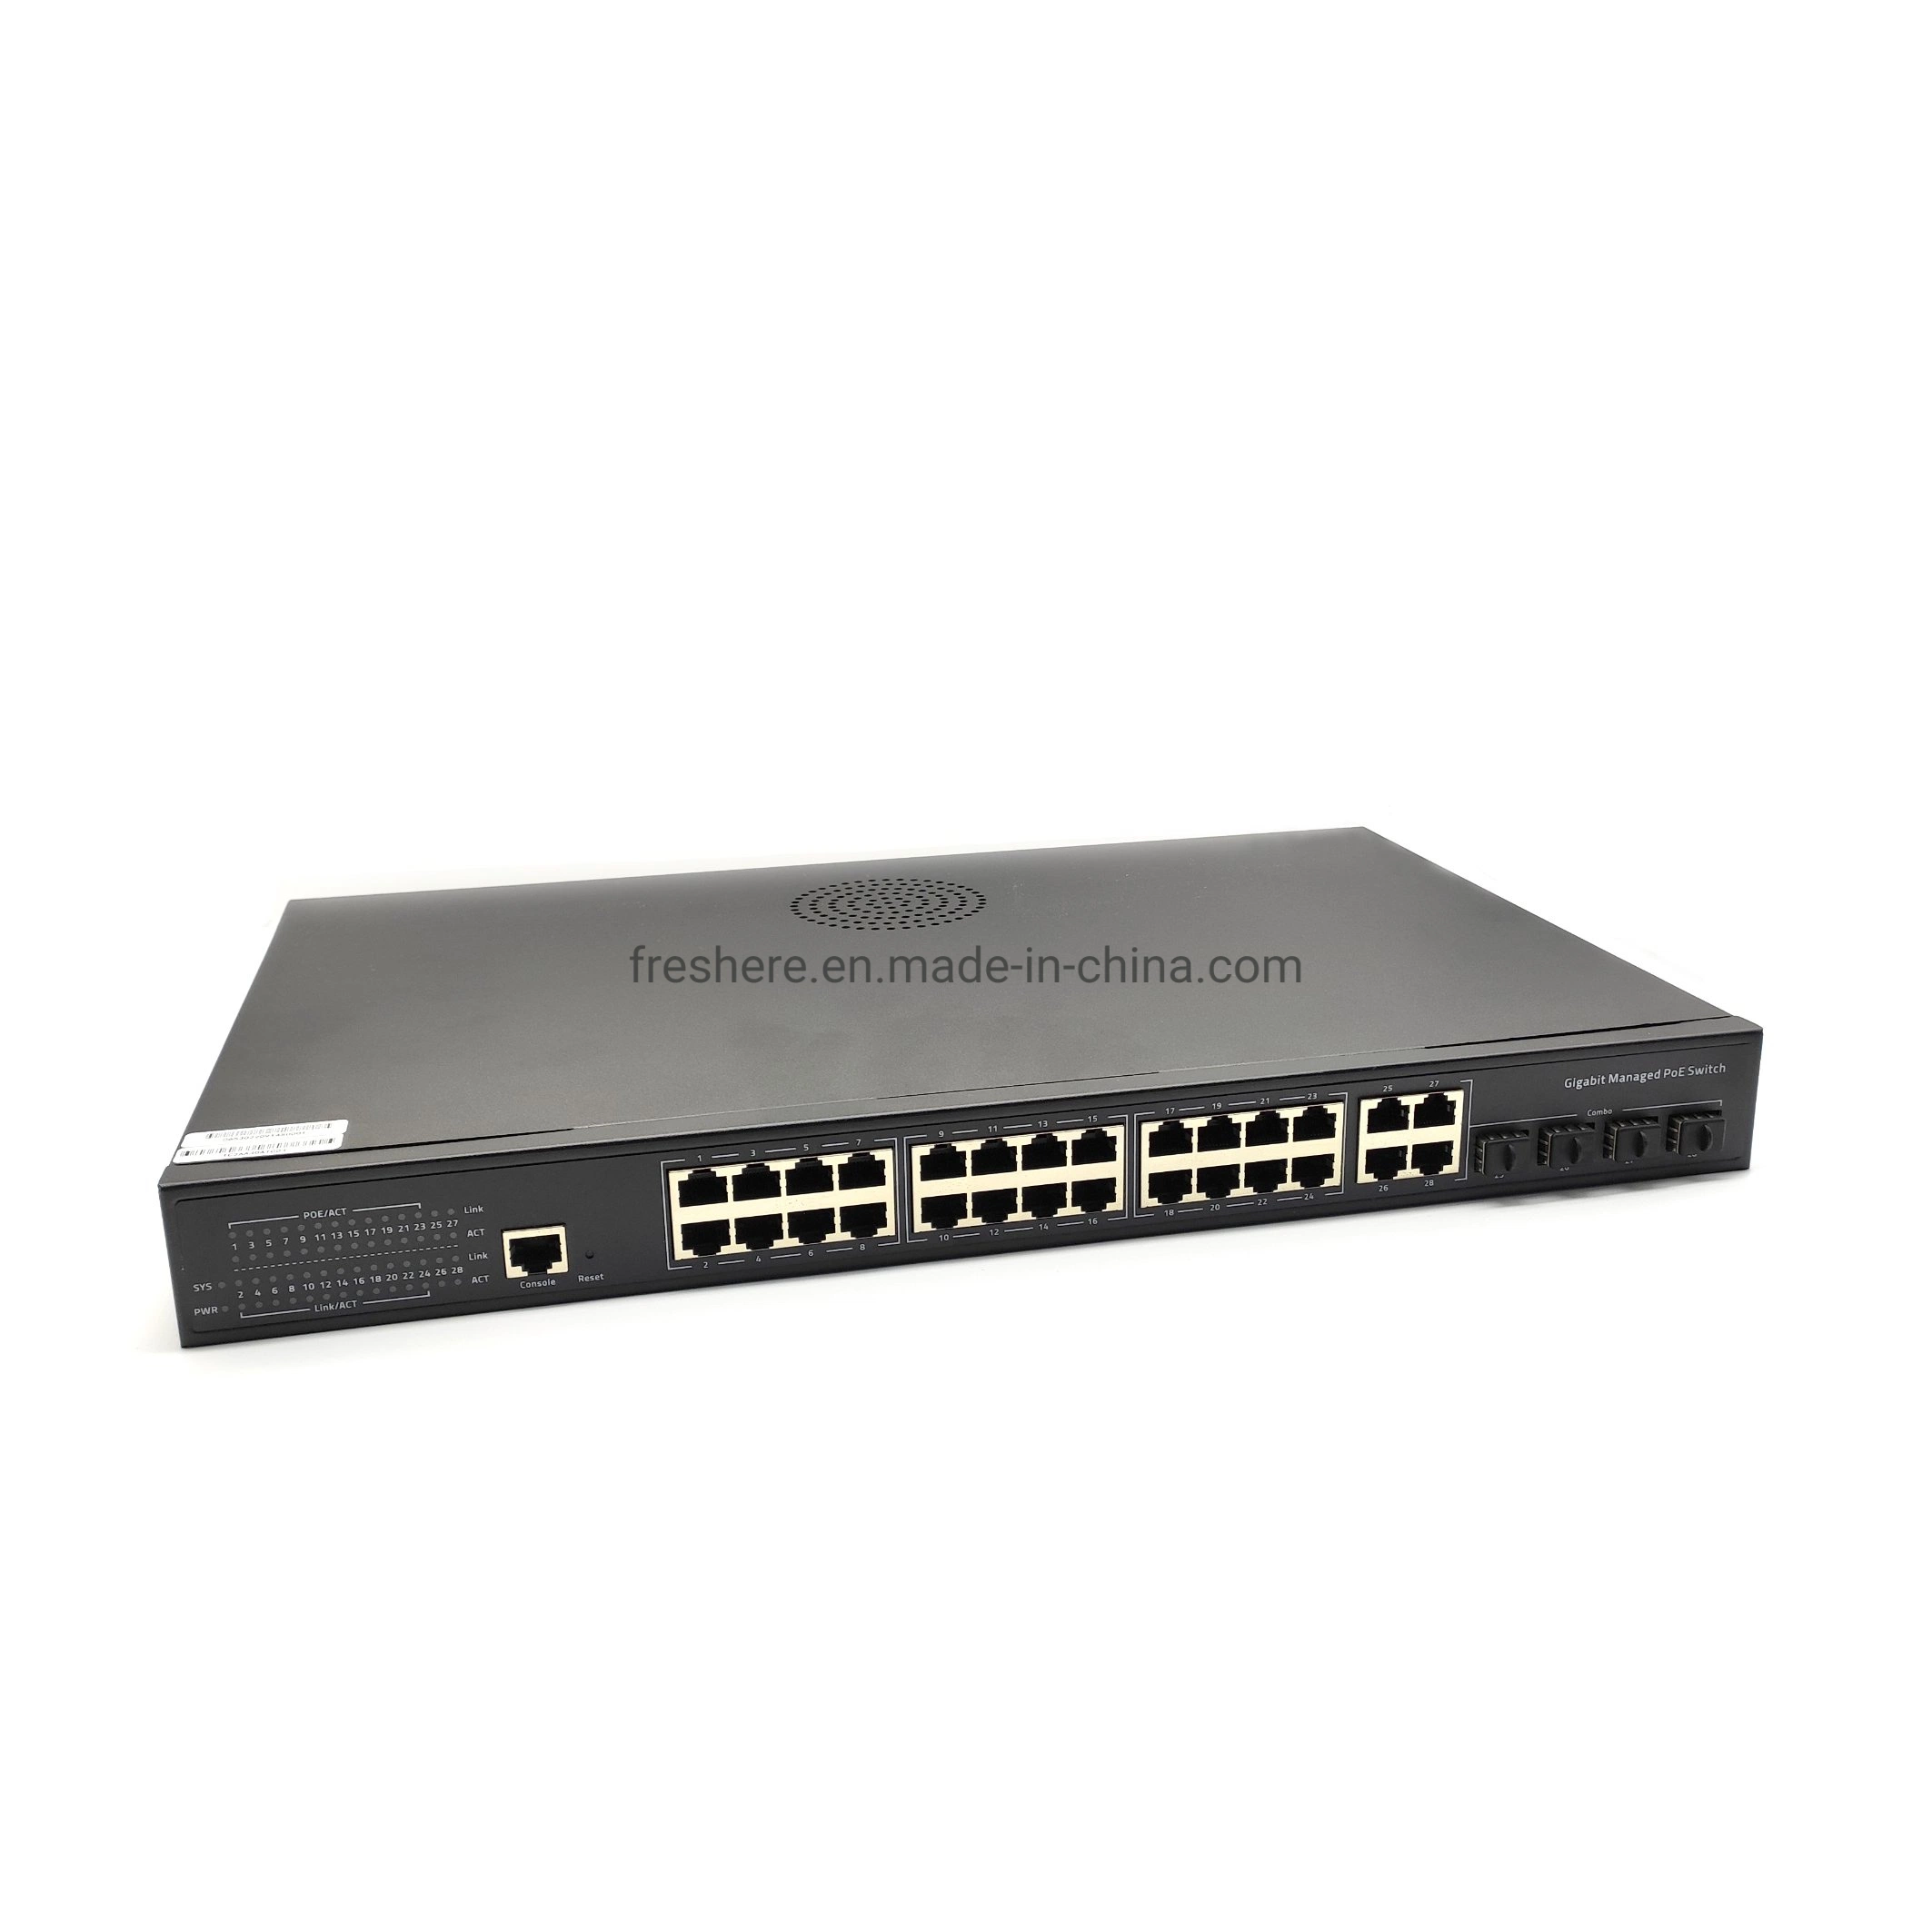 28-Port Gigabit Ethernet L2 Switch, 28 X 1GB SFP, with 4 X SFP Uplinks and 4 X 1g RJ45/SFP Combo Ports, Stackable Switch